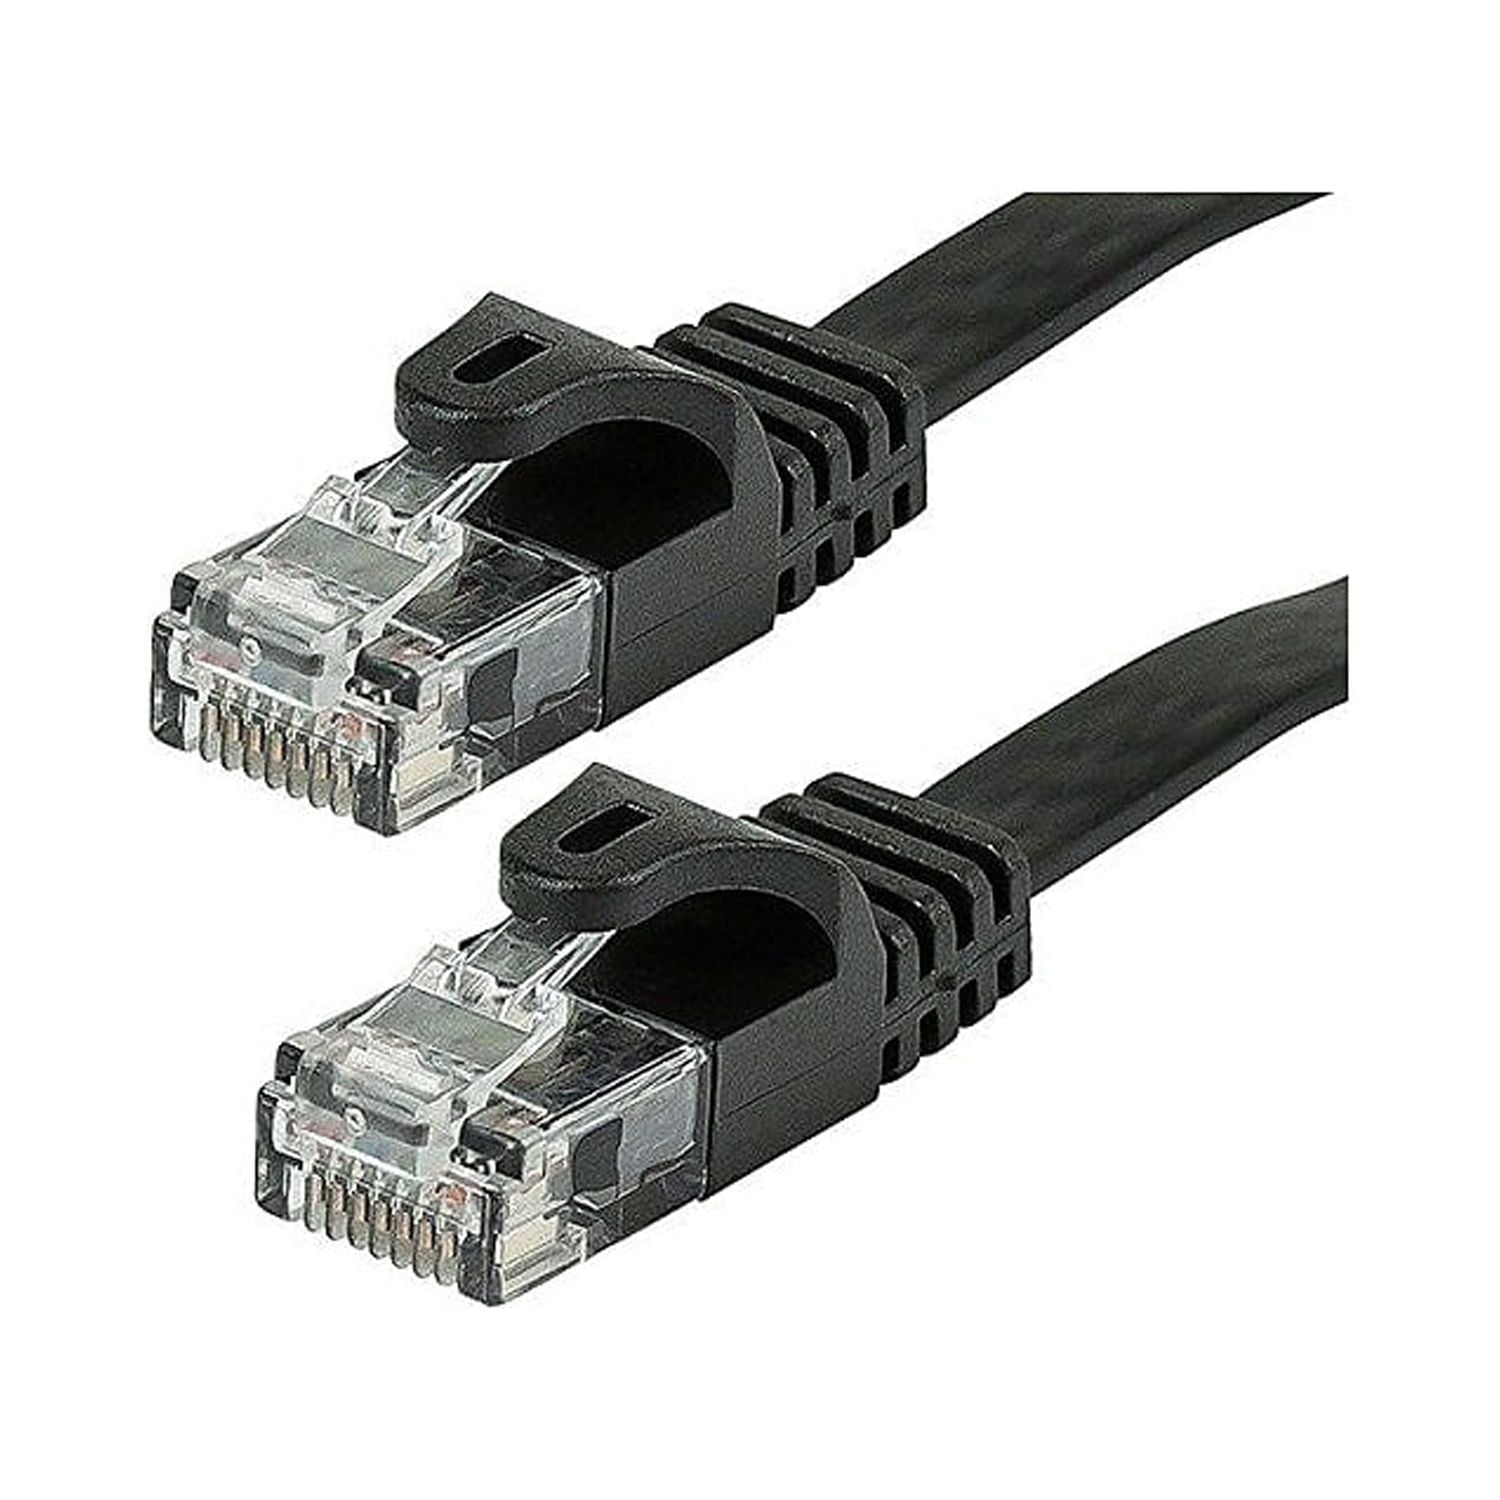 CableCreation 50 Feet CAT 5e Ethernet Patch Cable, RJ45 Computer Network  Cord, Cat5/Cat5e/Cat6 LAN Cable UTP 24AWG+100% Copper Wire for PC, Mac